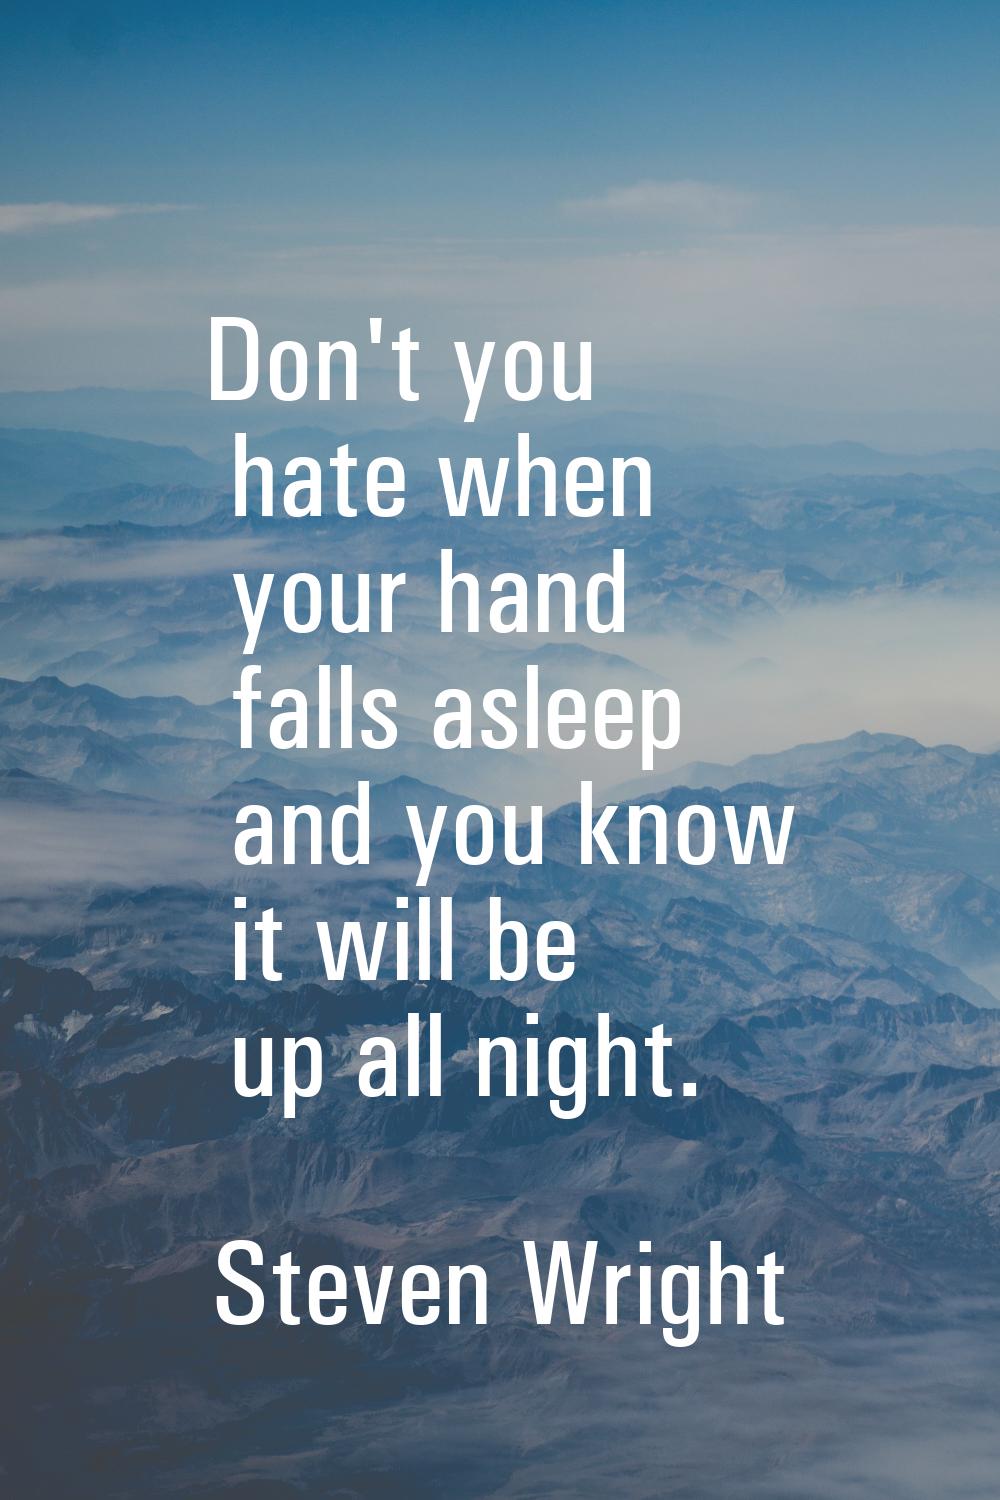 Don't you hate when your hand falls asleep and you know it will be up all night.